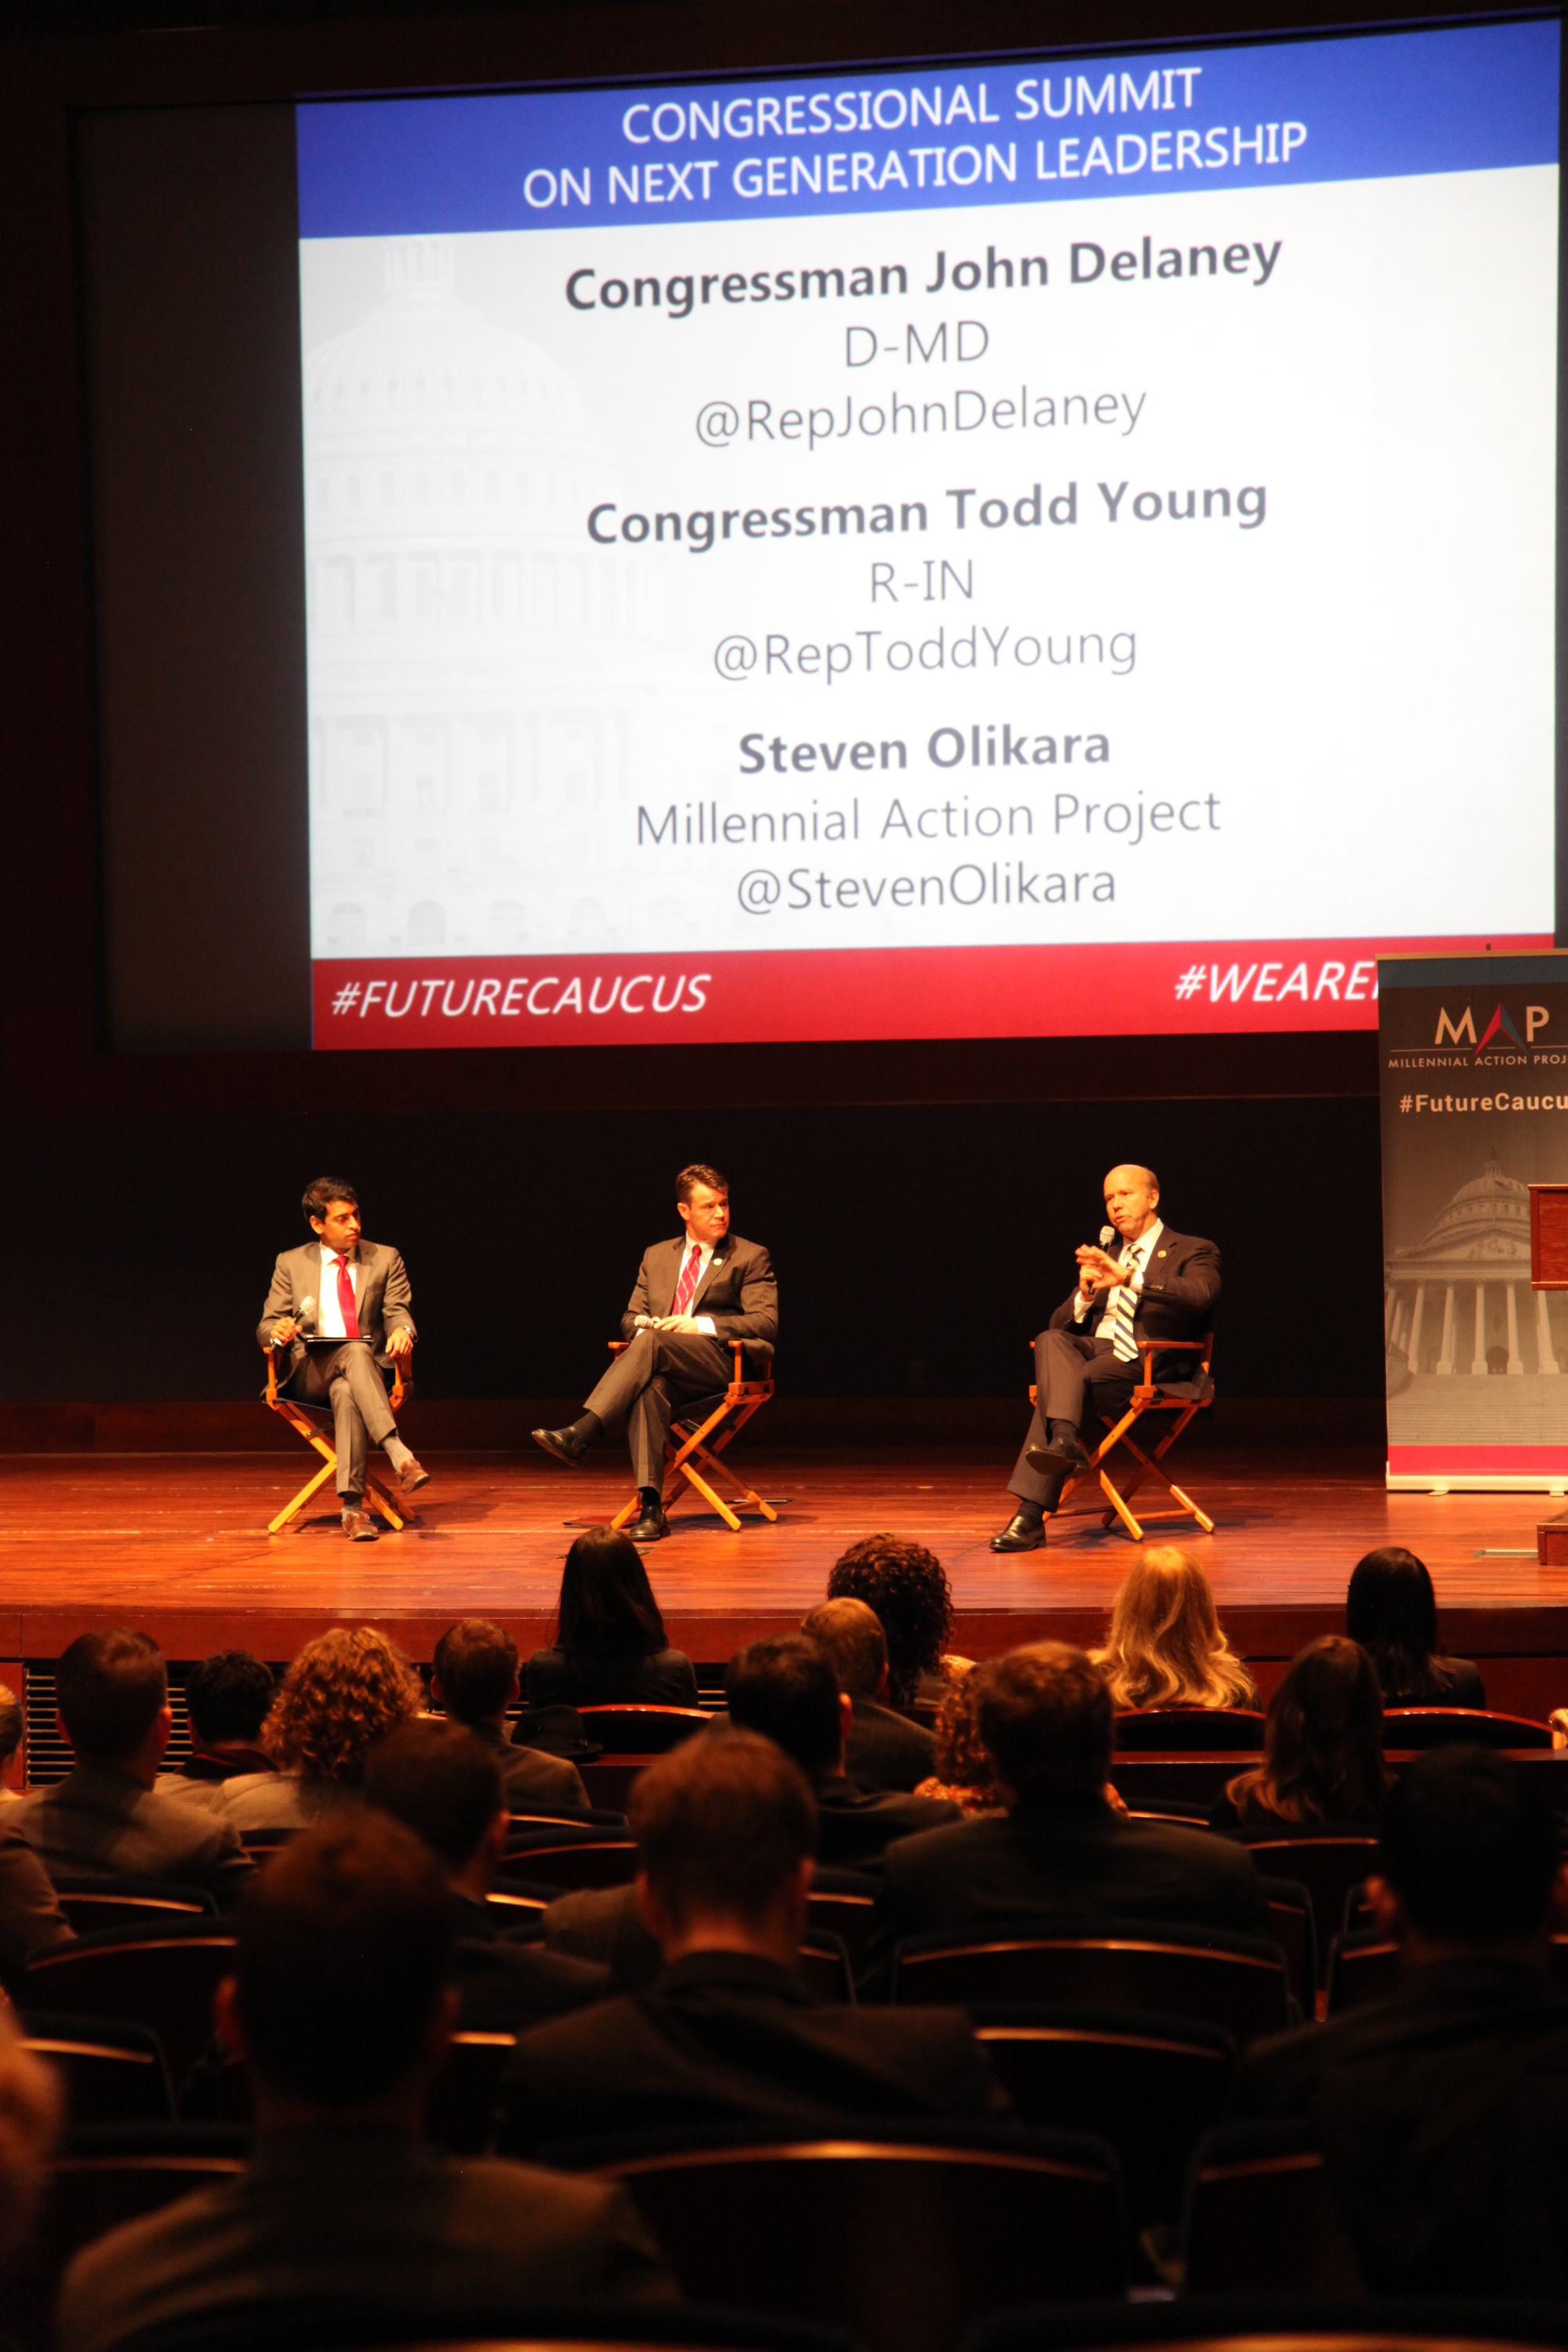 Reps. Young and Delaney at the 2014 Congressional Summit on Next Generation Leadership.